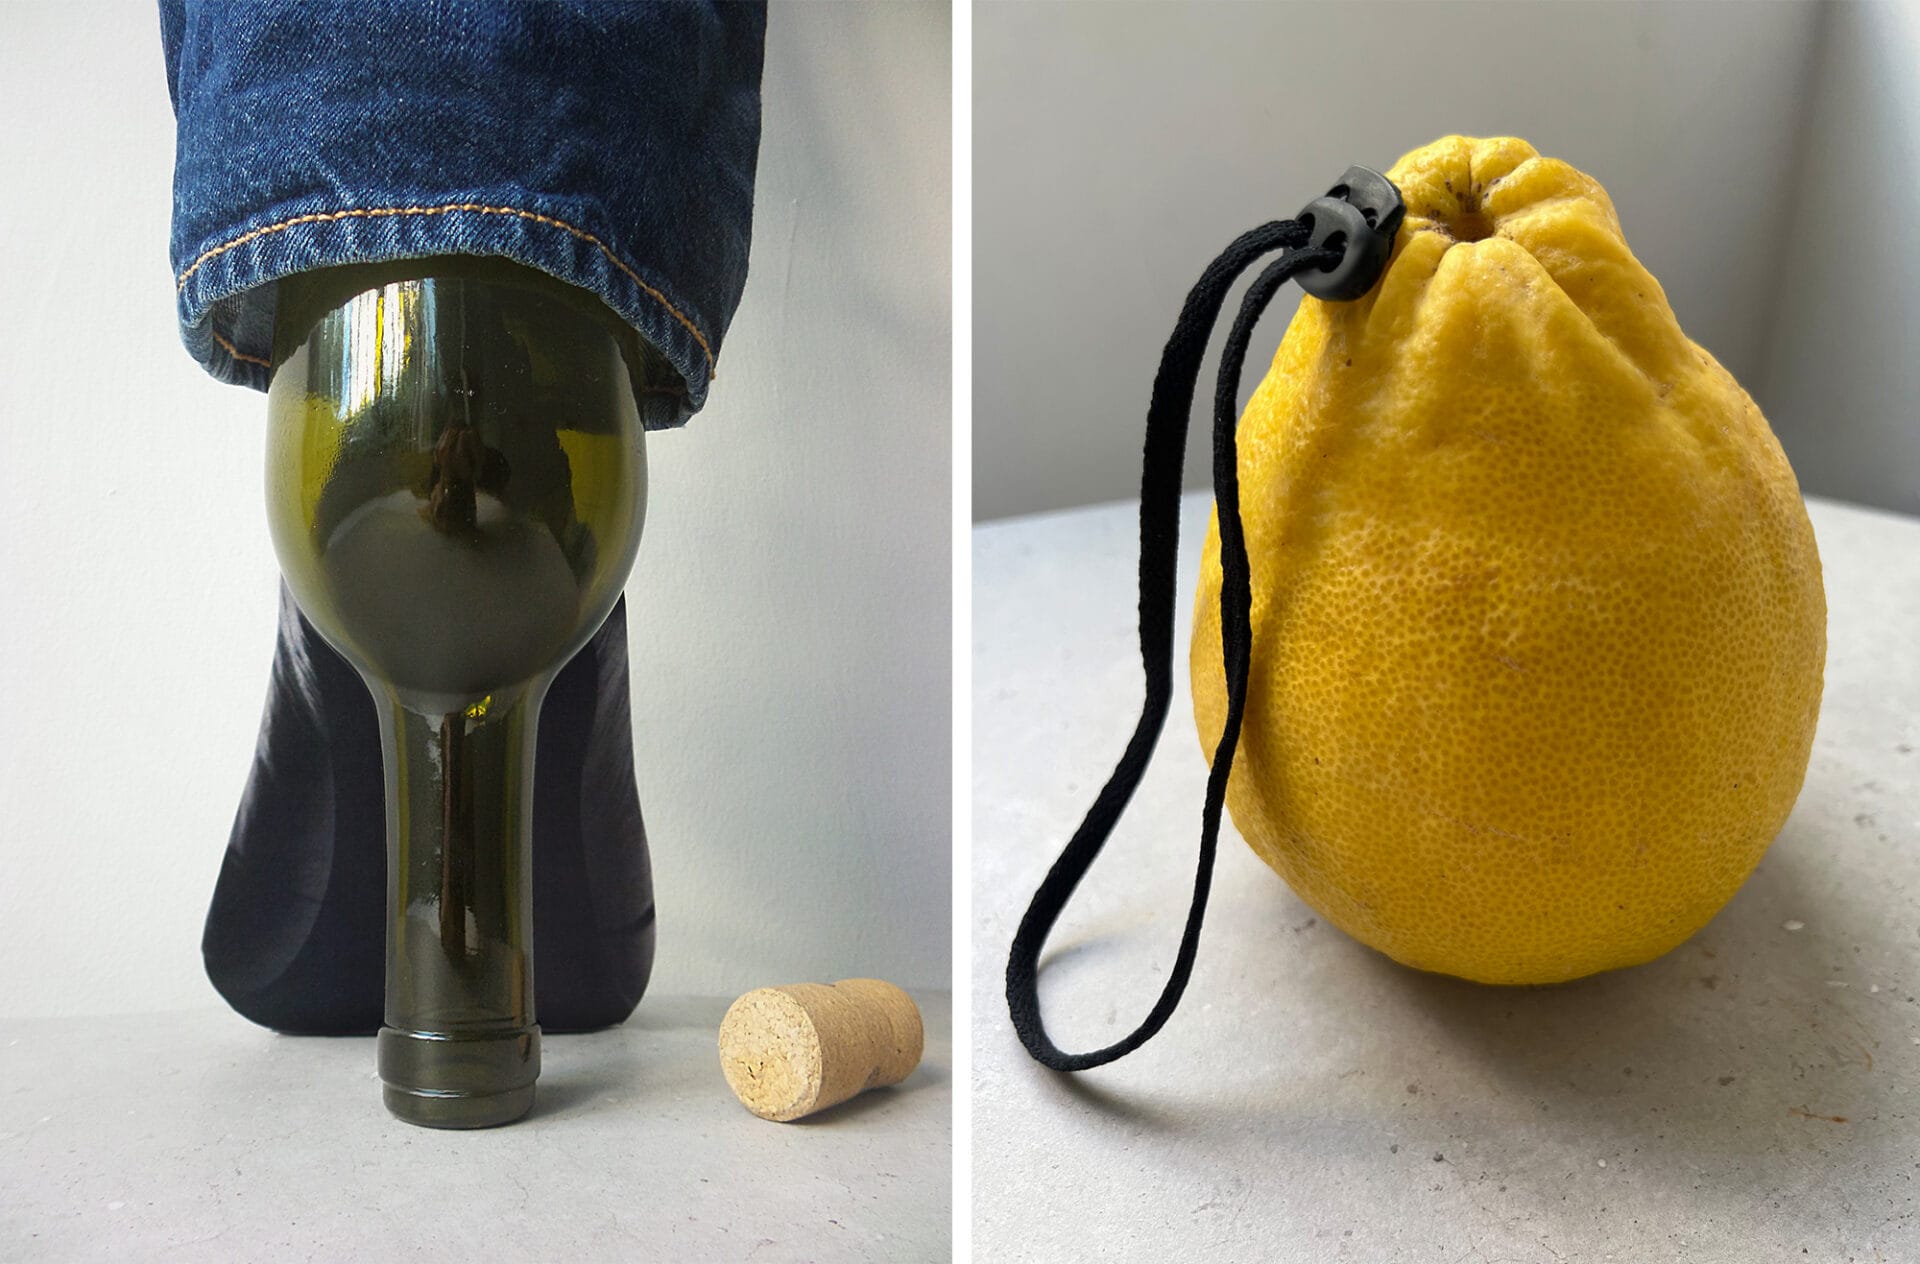 two image side by side showing, on the left, a wine bottle positioned like the heel of a stiletto with a cork next to it, and on the right, a lemon with the crinkled top around the stem looking cinched by an attached purse string